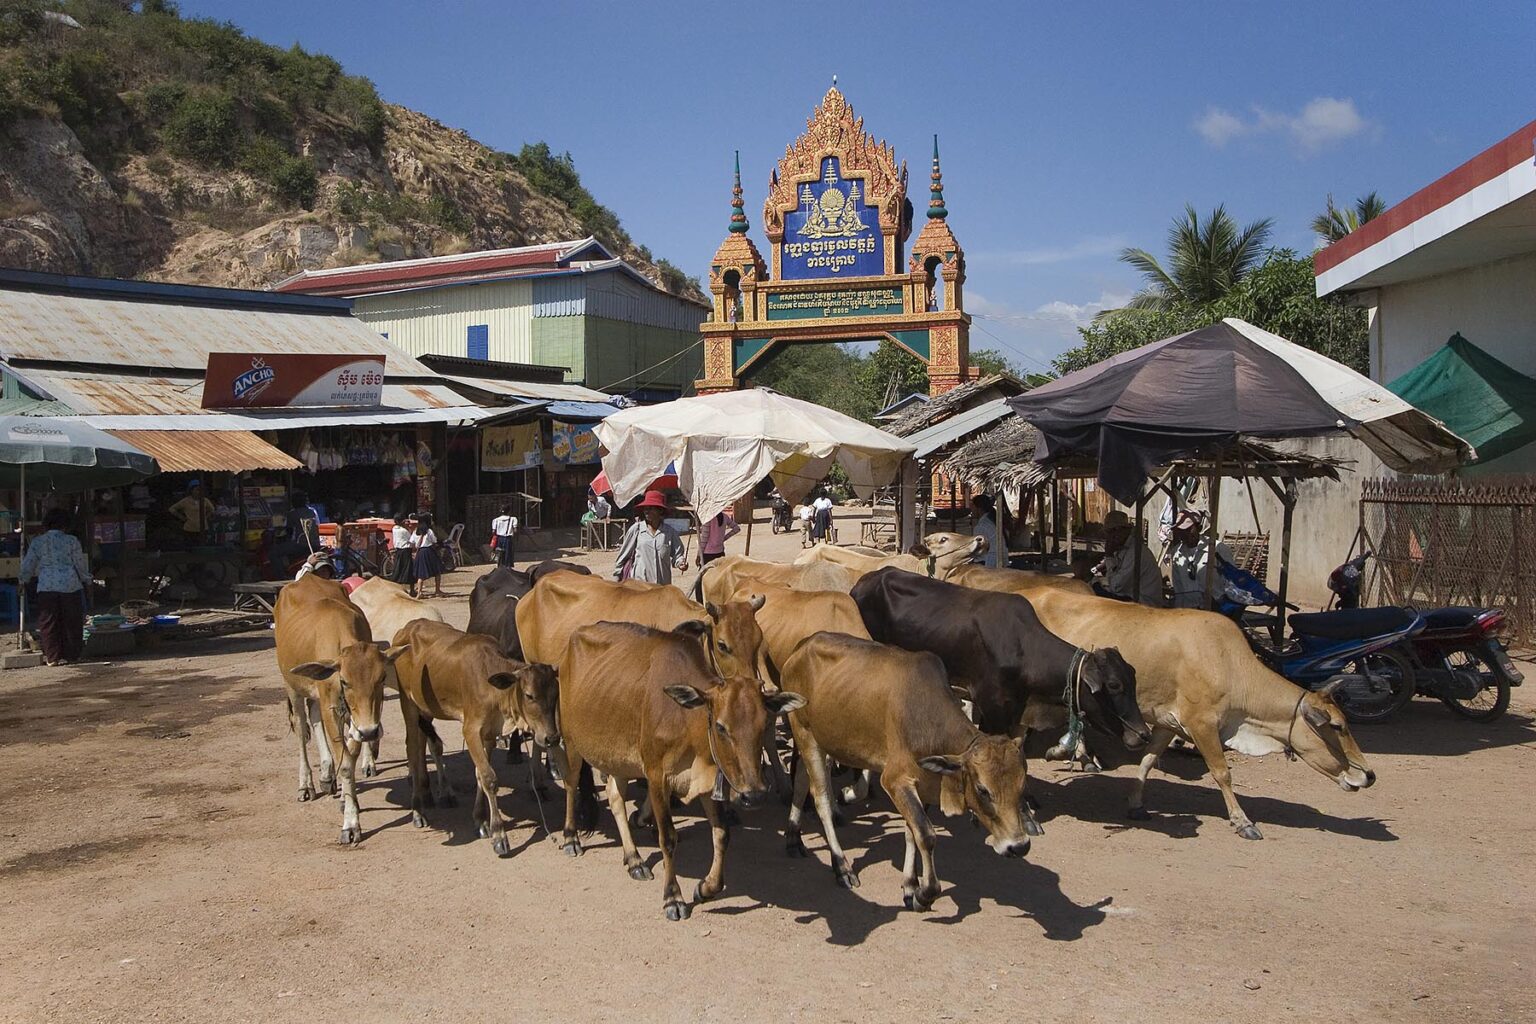 Cattle are herded through the street of a village near Siem Reap, Cambodia